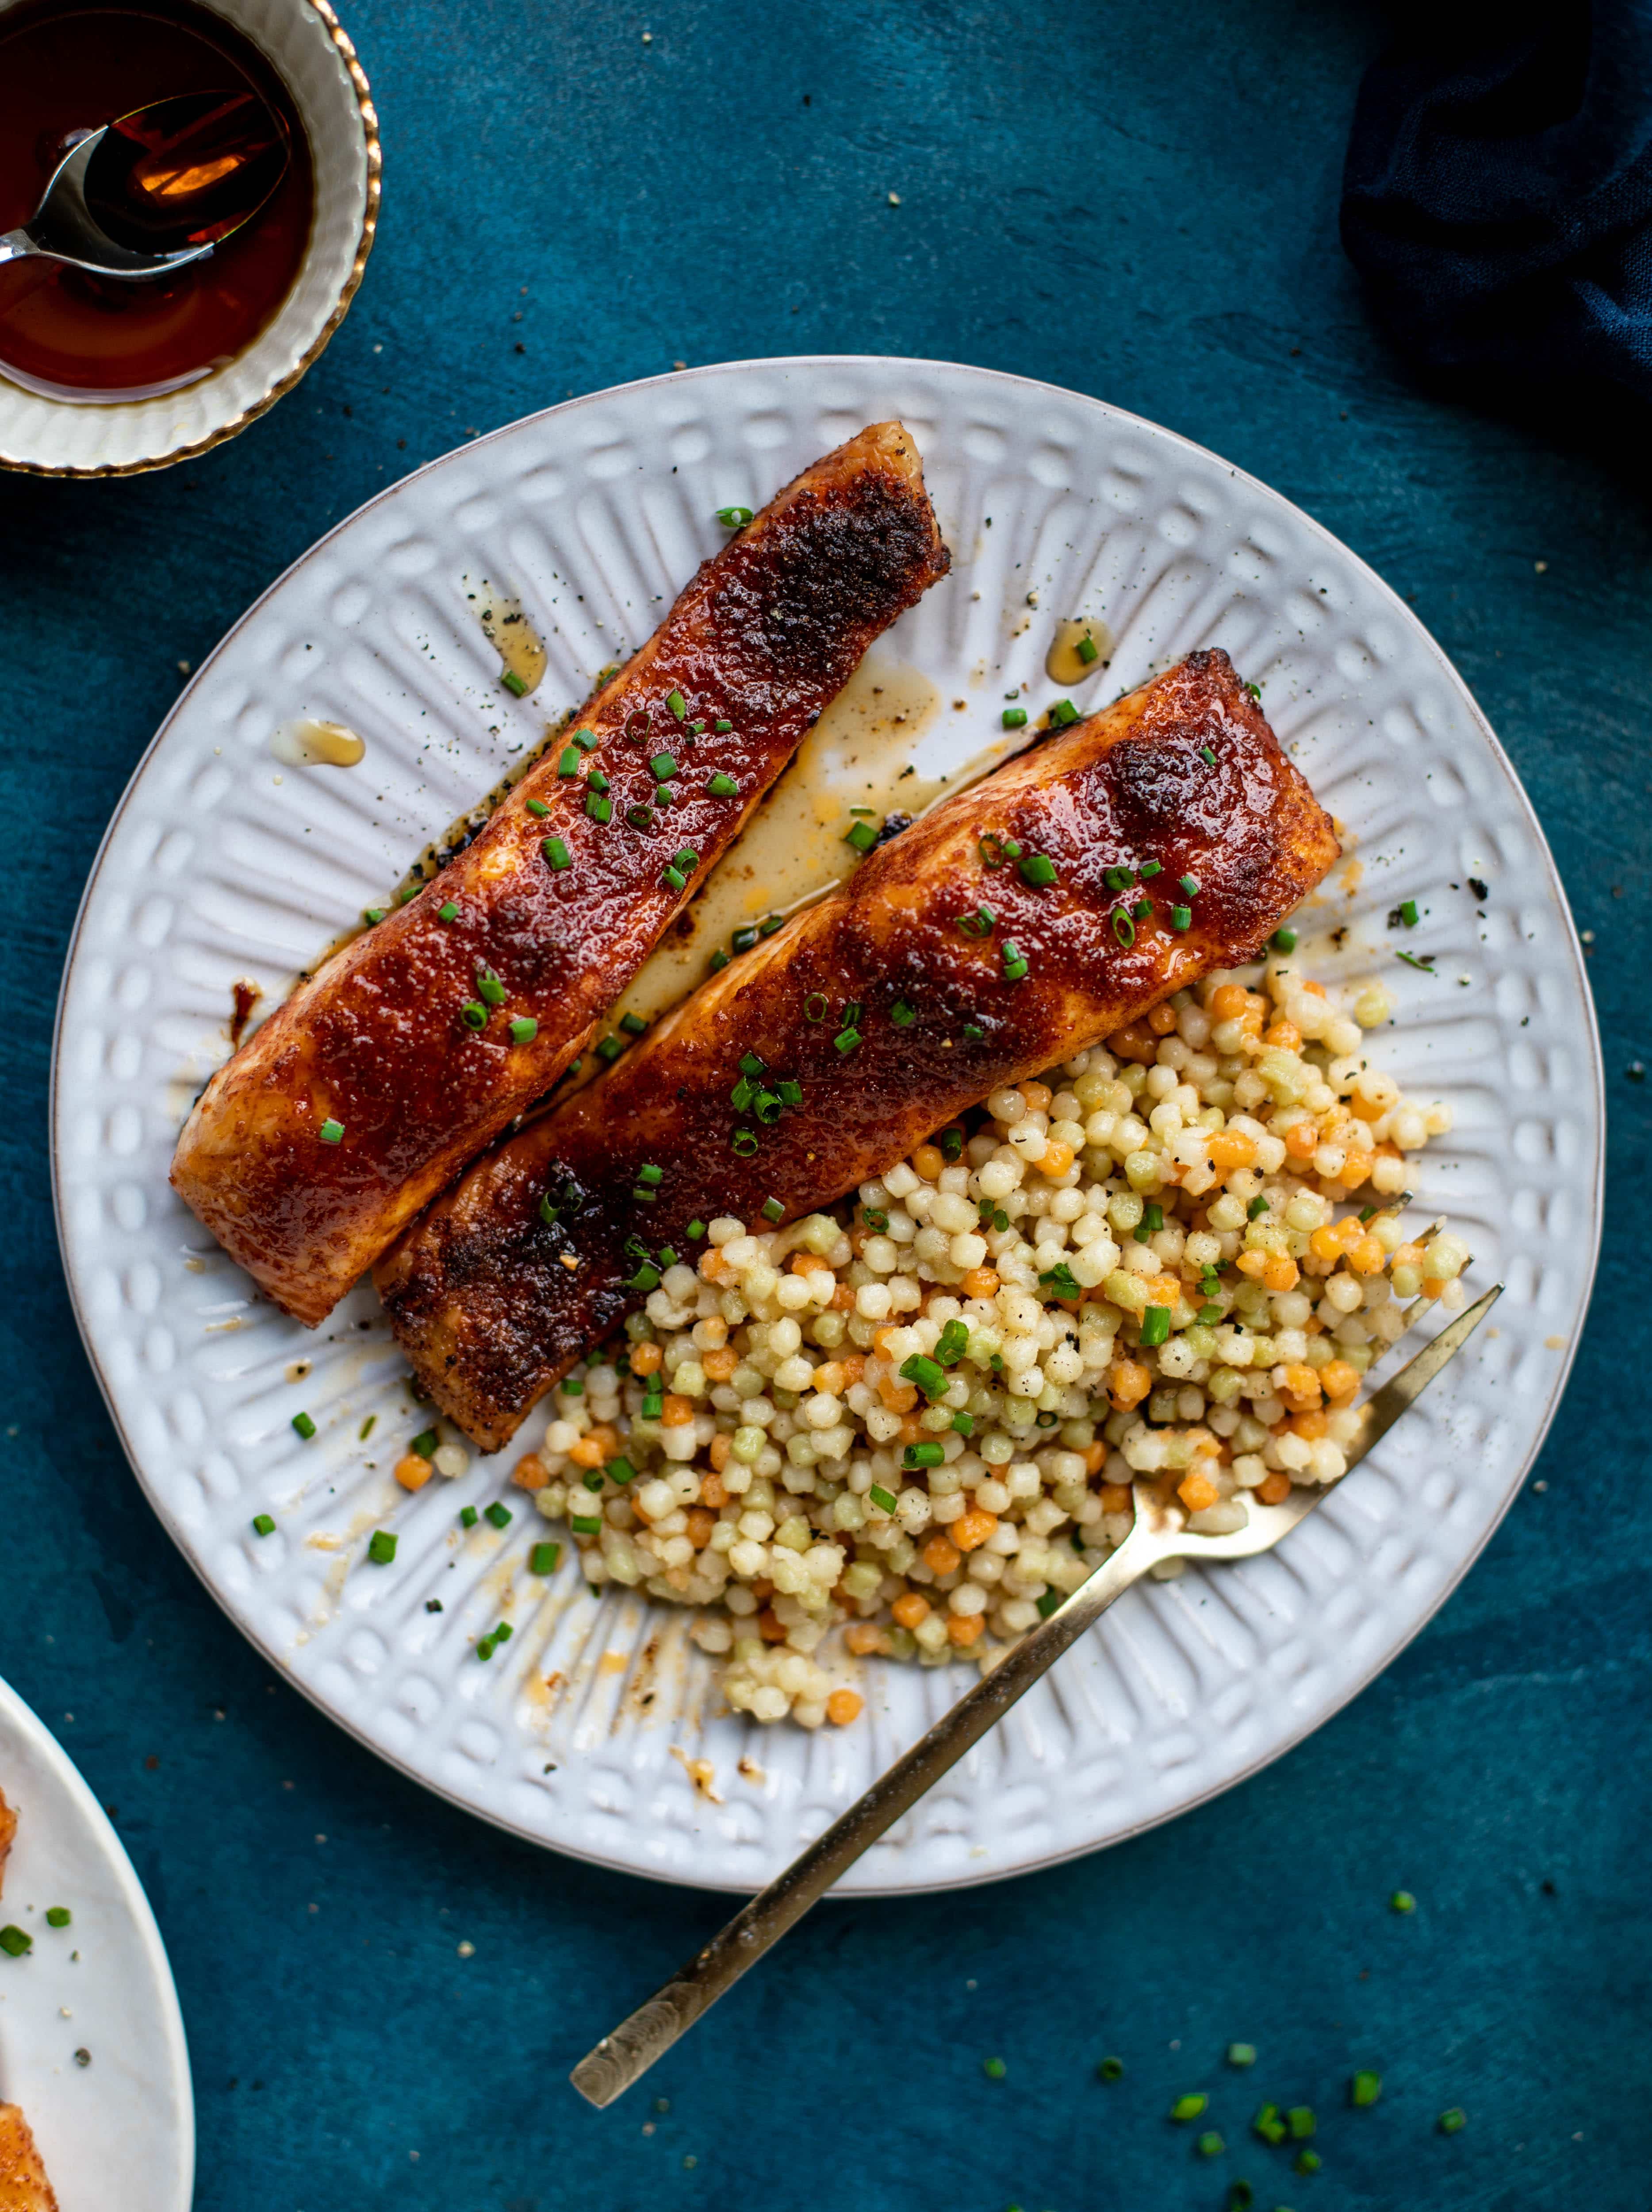 This maple bbq salmon is a quick and delicious weeknight meal. Serve with brown butter couscous and your favorite veg to round it out!